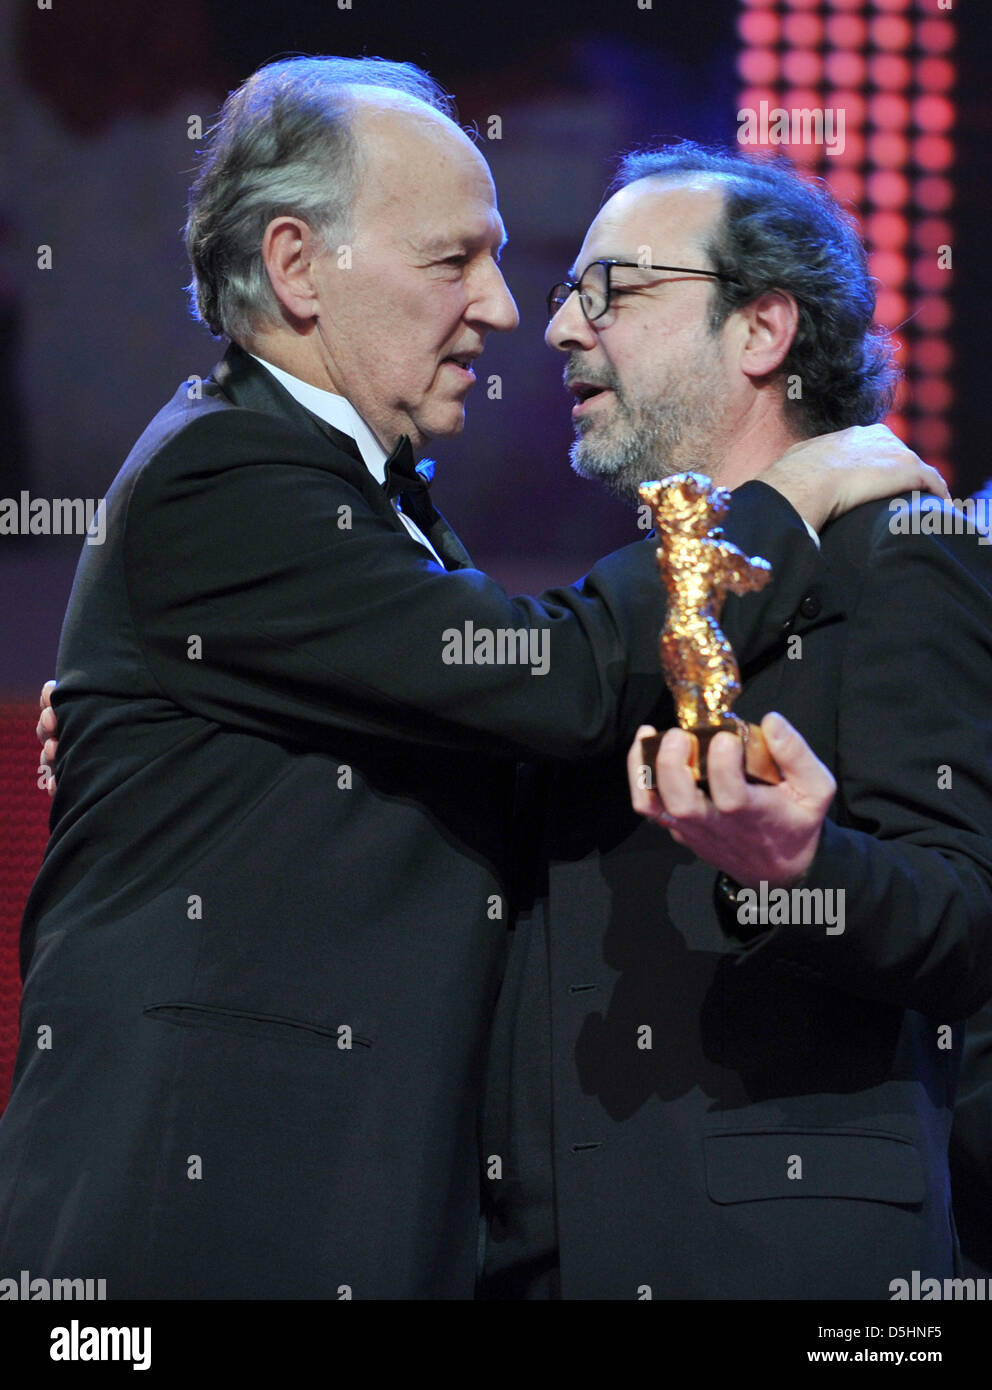 Jury president Werner Herzog (L) honors director Semih Kaplanoglu with the Golden Bear for the Best Film for the movie 'Honey' during the award ceremony of the 60th Berlinale International Film Festival in Berlin, Germany, Saturday, 20 February 2010. Up to 400 films are shown every year as part of the Berlinale's public programme. The Berlinale is divided into different sections, e Stock Photo